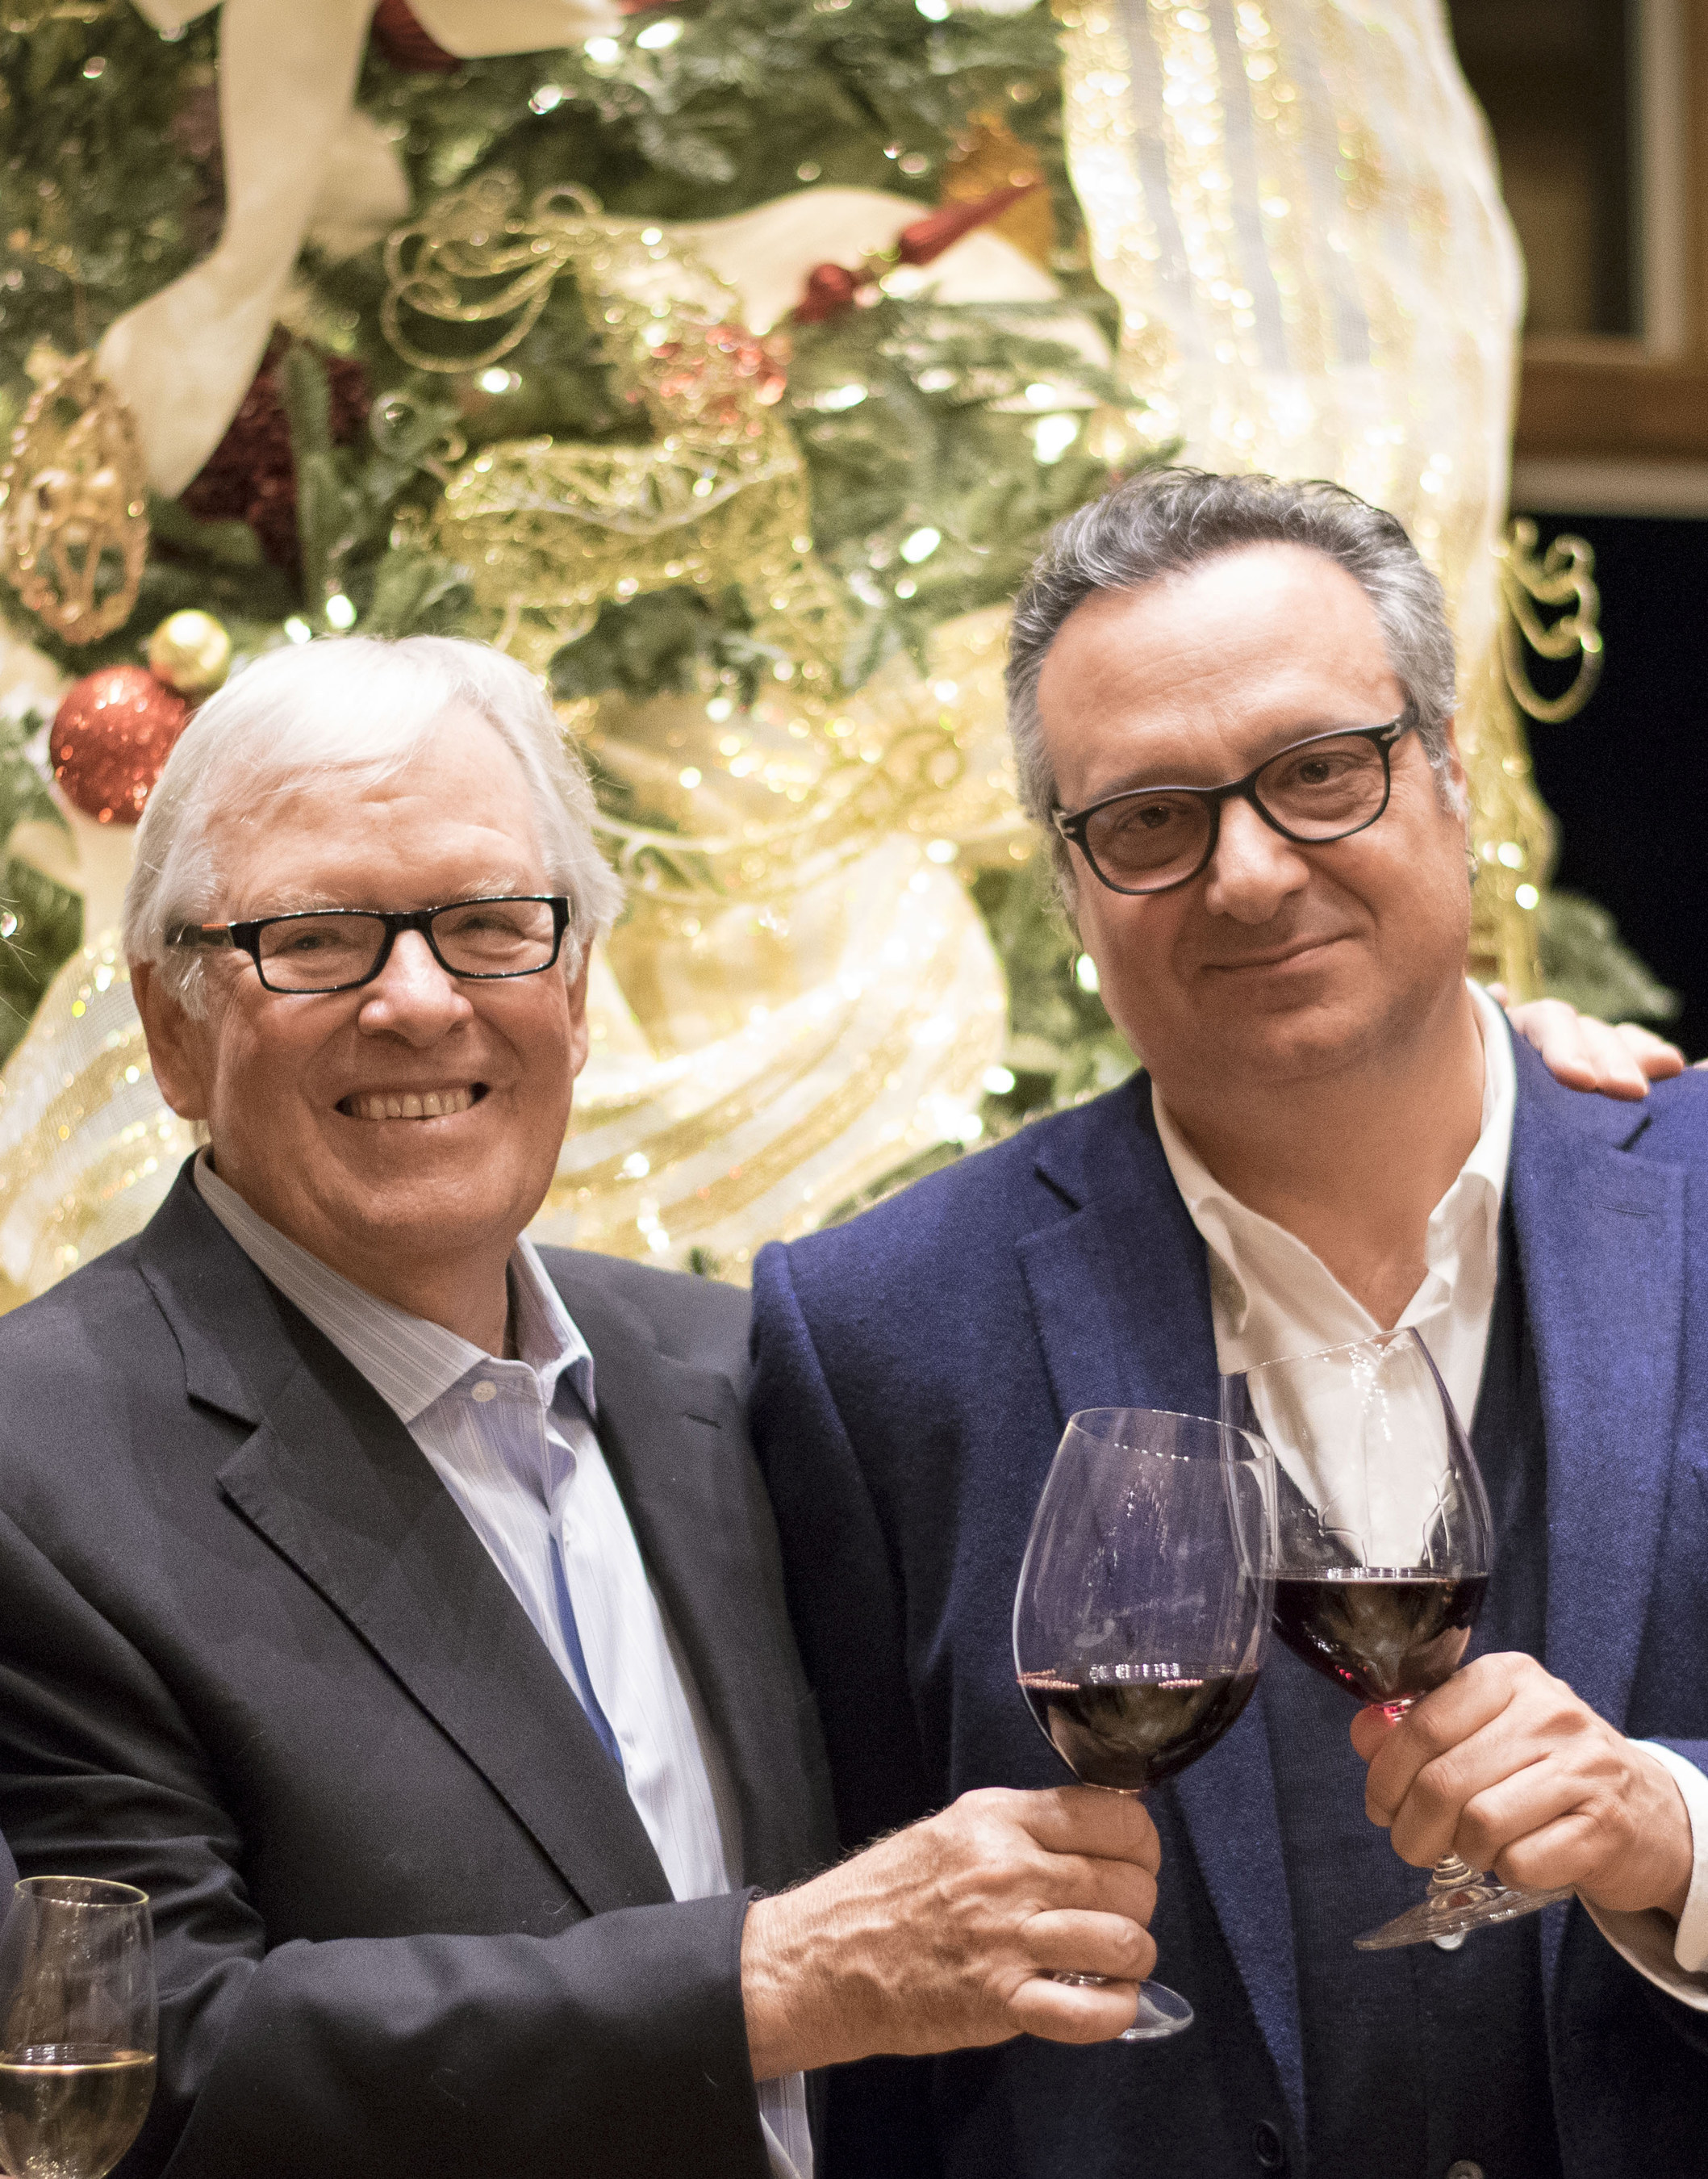 Bill Foley, Founder, Foley Family Wines and Mario Piccini, Managing Director, Piccini Wines.